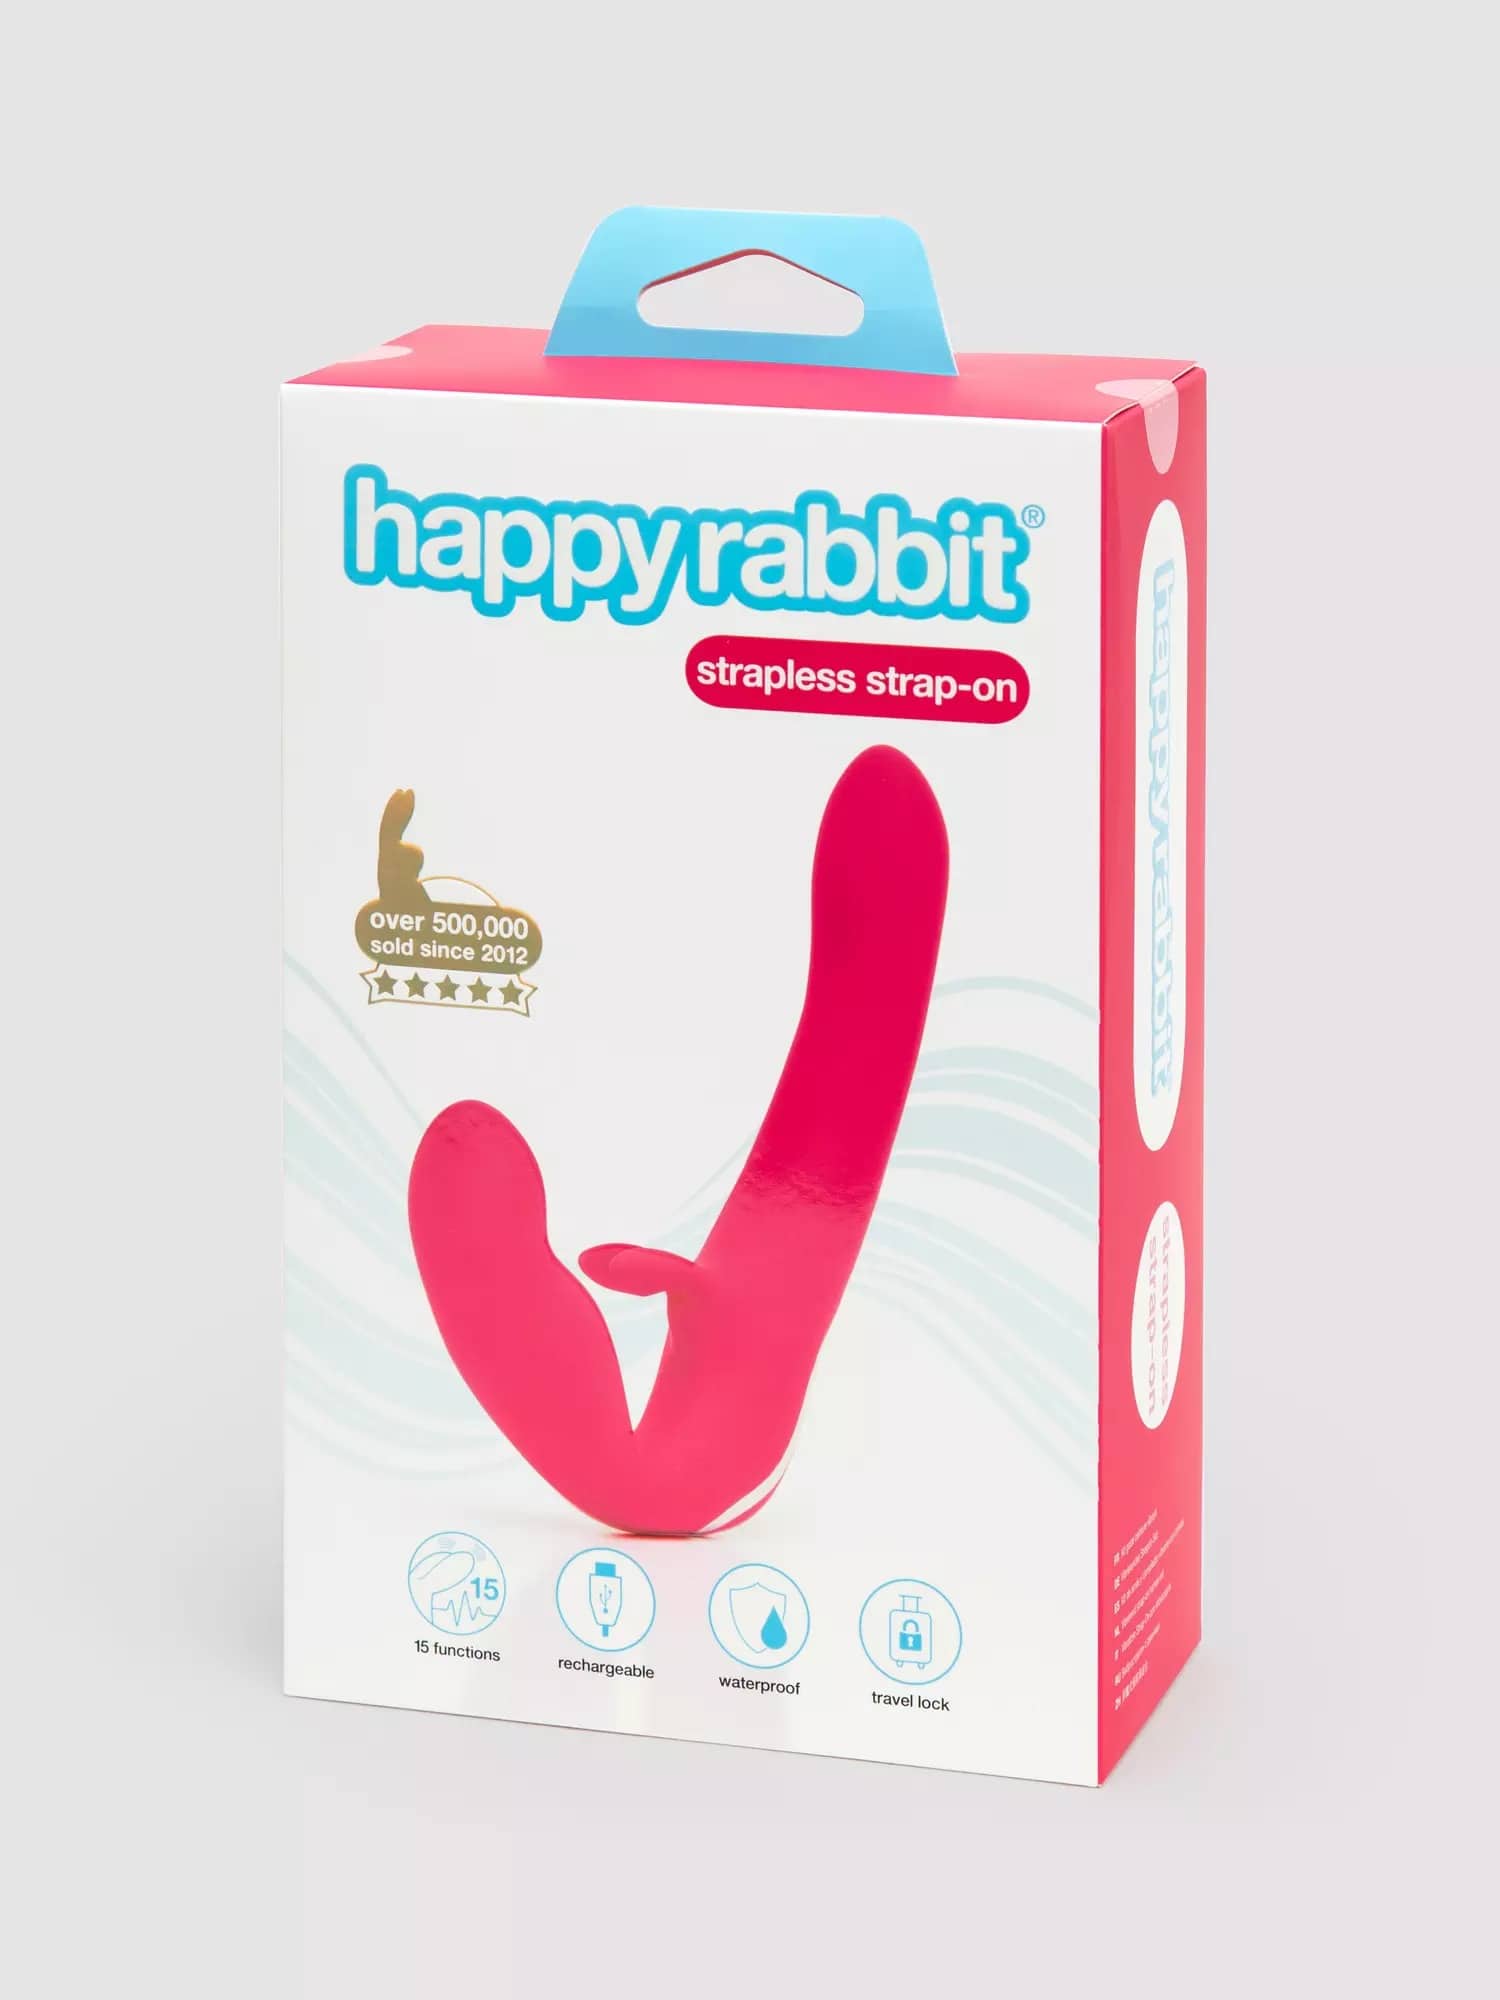 Happy Rabbit Rechargeable Vibrating Strapless Strap-On. Slide 5